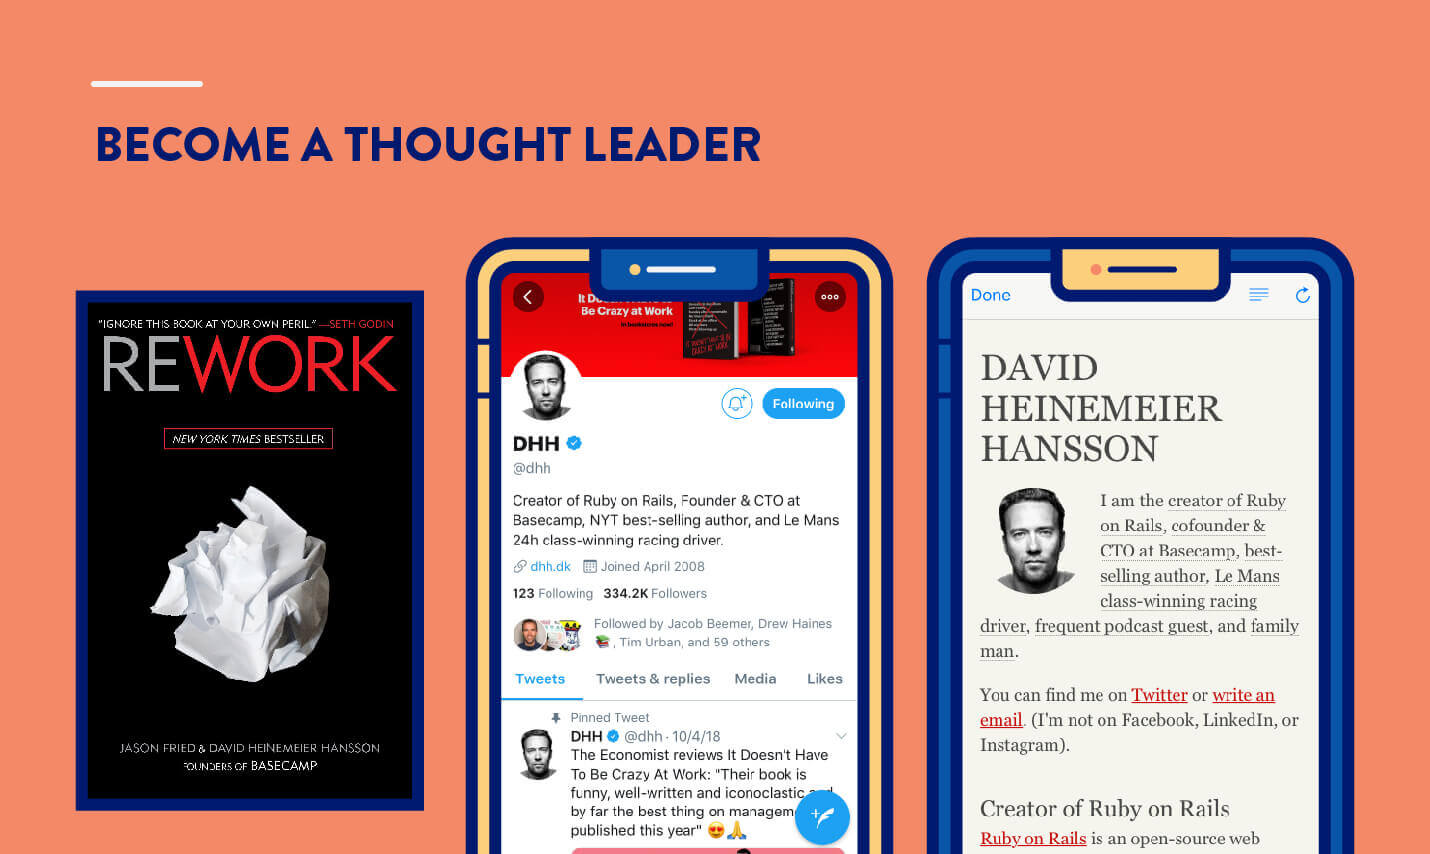 become a thought leader example from Daniel Heinemelier Hansson DHH author, twitter, and personal blog example for app marketing